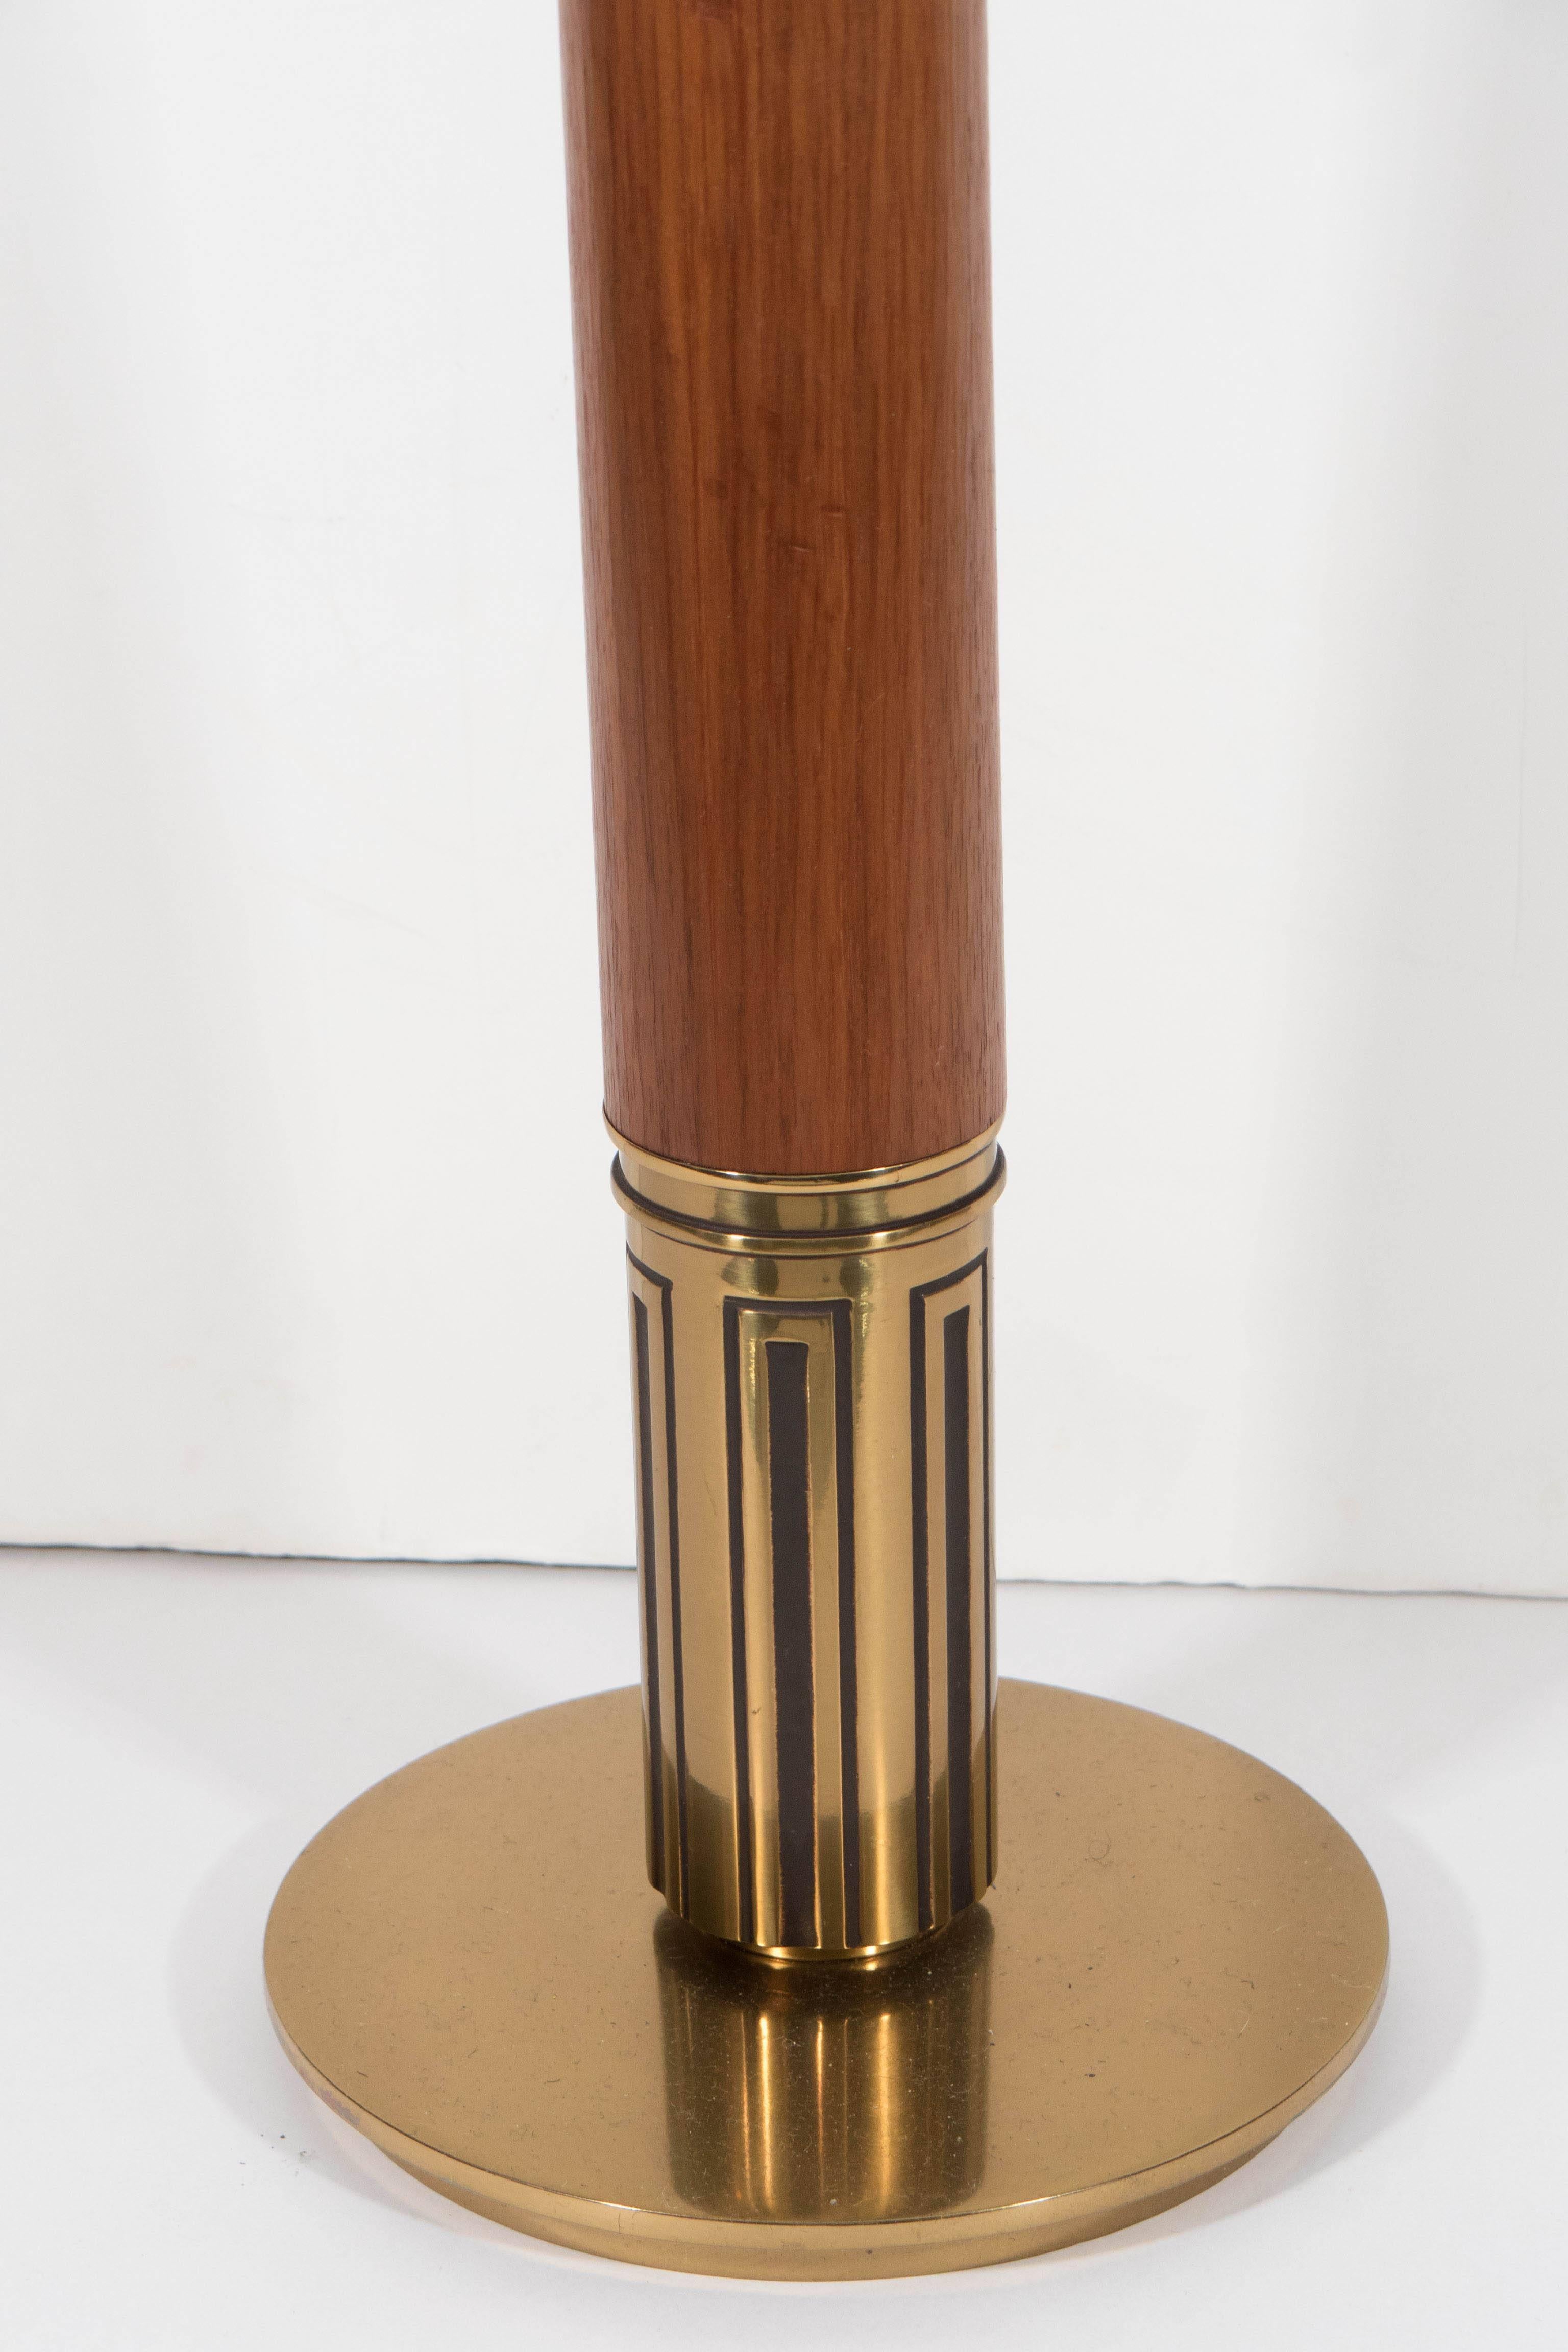 A pair of lengthy table lamps by Stiffel, manufactured circa 1970s and designed in the manner of designer Tommi Parzinger, each with single socket, over brass stem, with decorative bobeche and walnut accent on circular base. Includes three-way